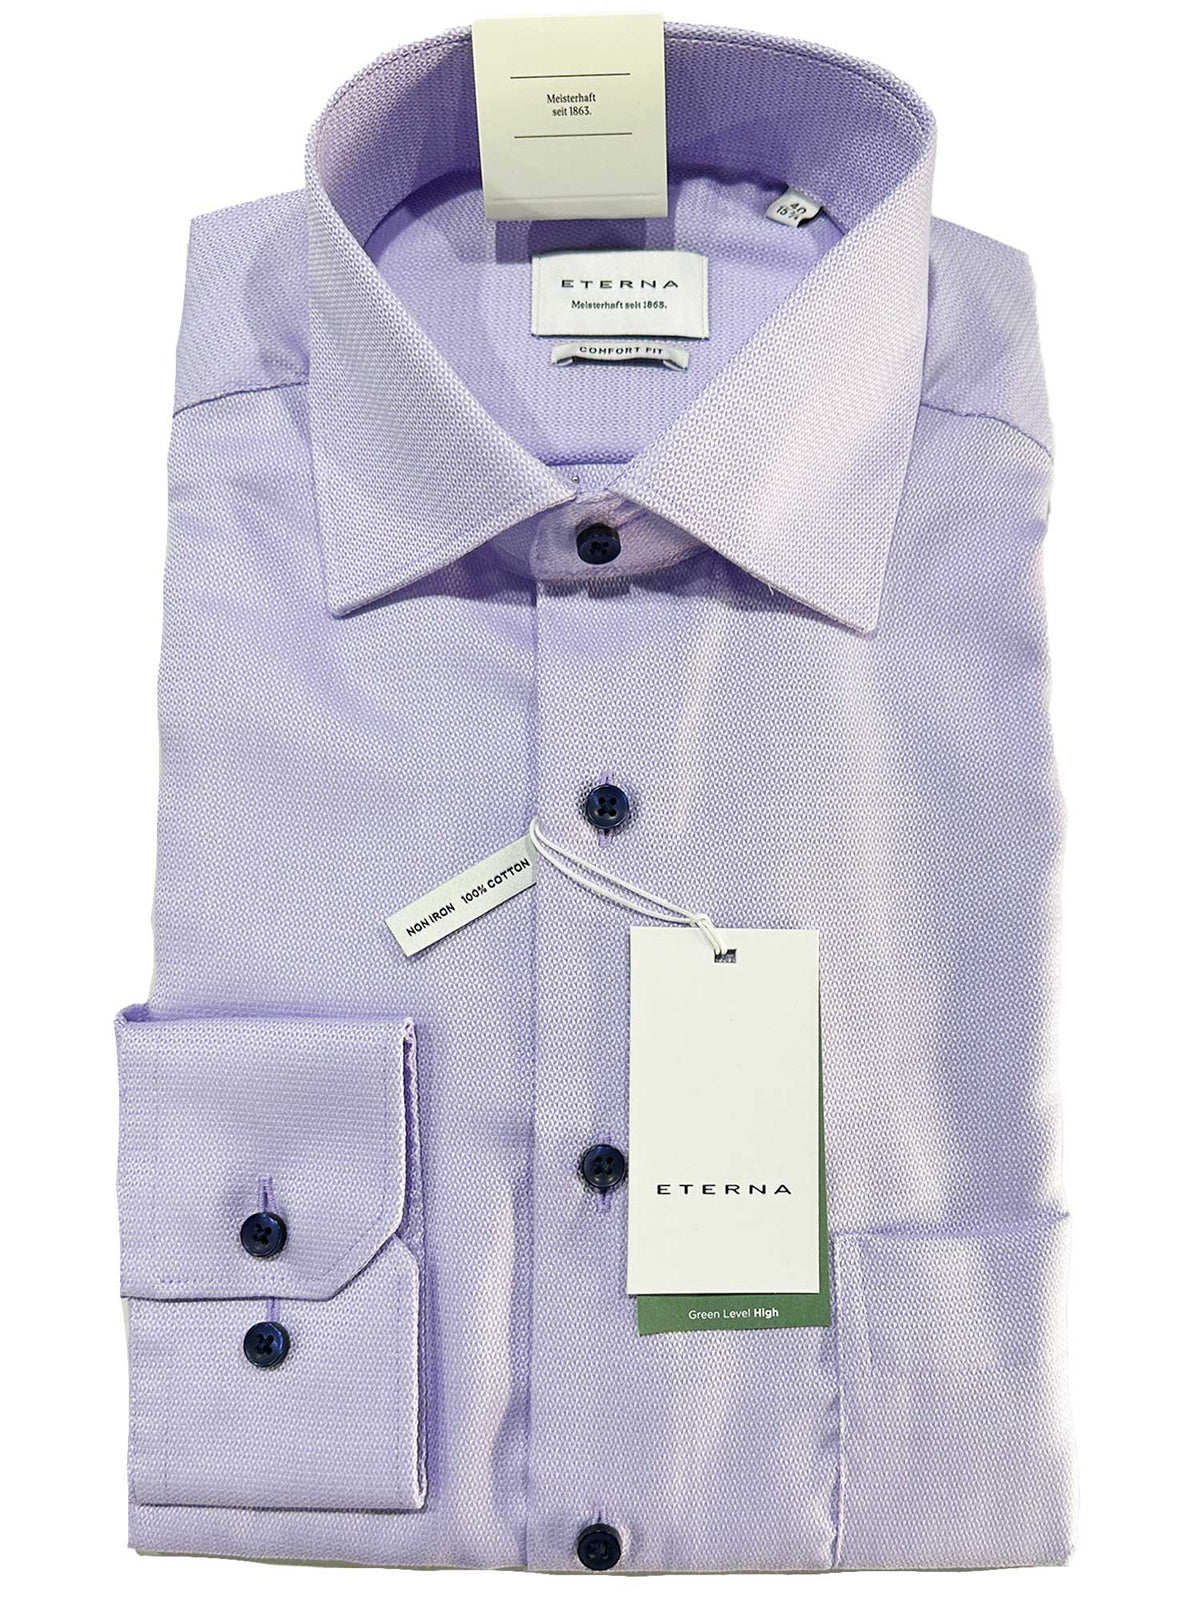 3475-95C  https://harrysformenswear.com.au/products/3475-95c  Limited Edition ETERNA MEN´S SHIRTS Fine Cotton Comfort Fit -(Right for the Bigger Fit Man) With Pocket Design in Germany Contrast Trim Non-Iron men's shirts are drip dry; in other words, the fabric straightens automatically after washing and does not need to be ironed.